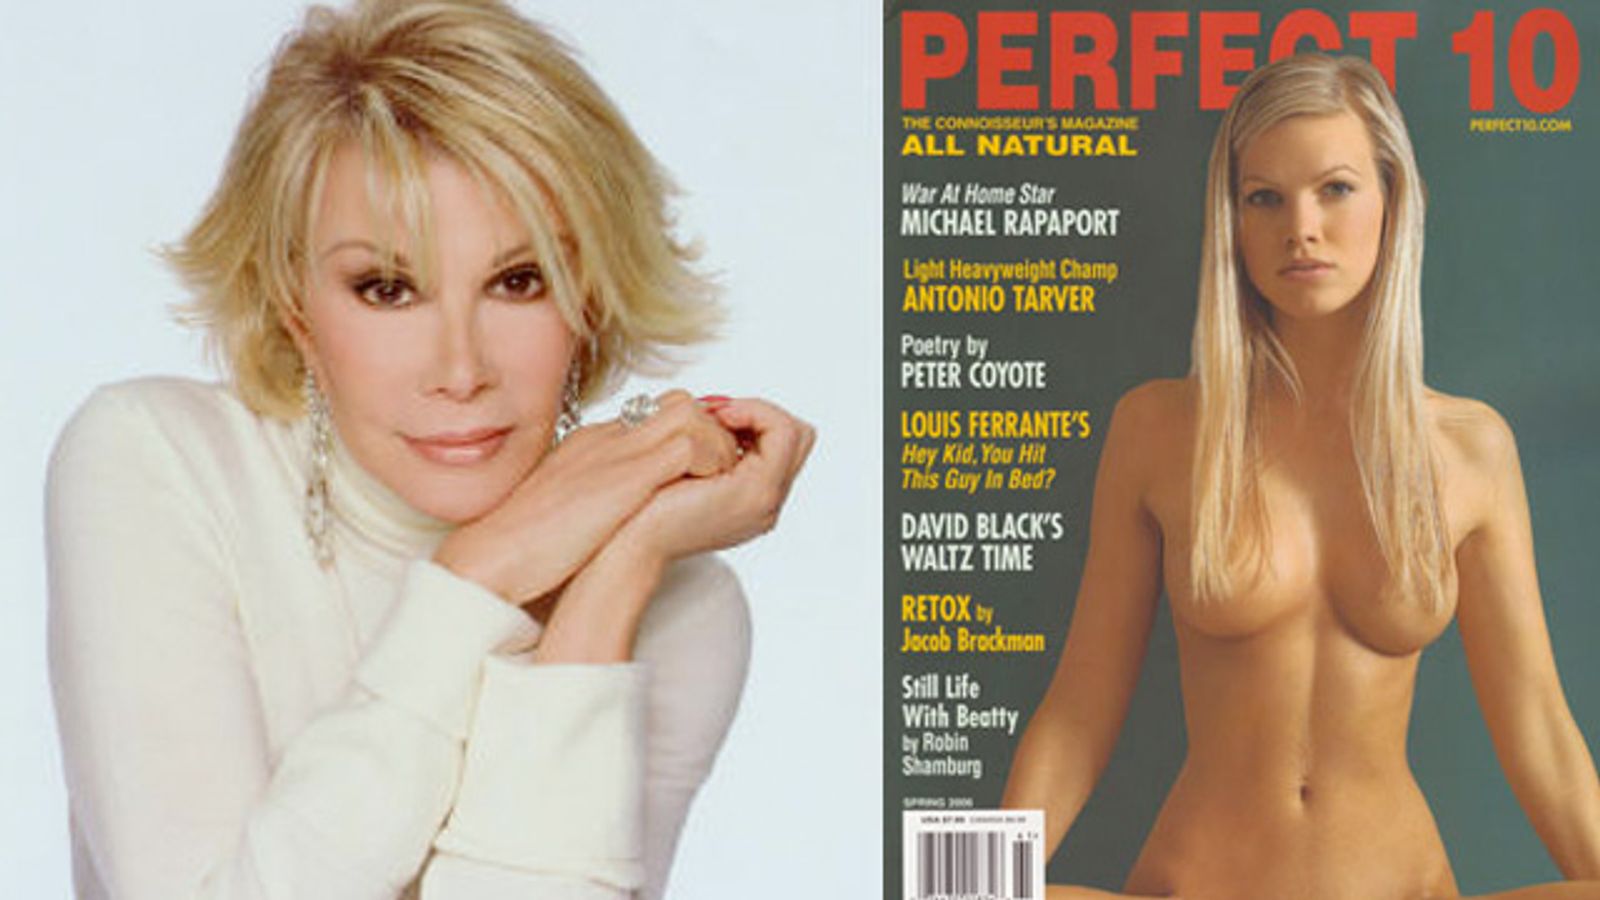 Are Joan Rivers and Norm Zada the Perfect 2?